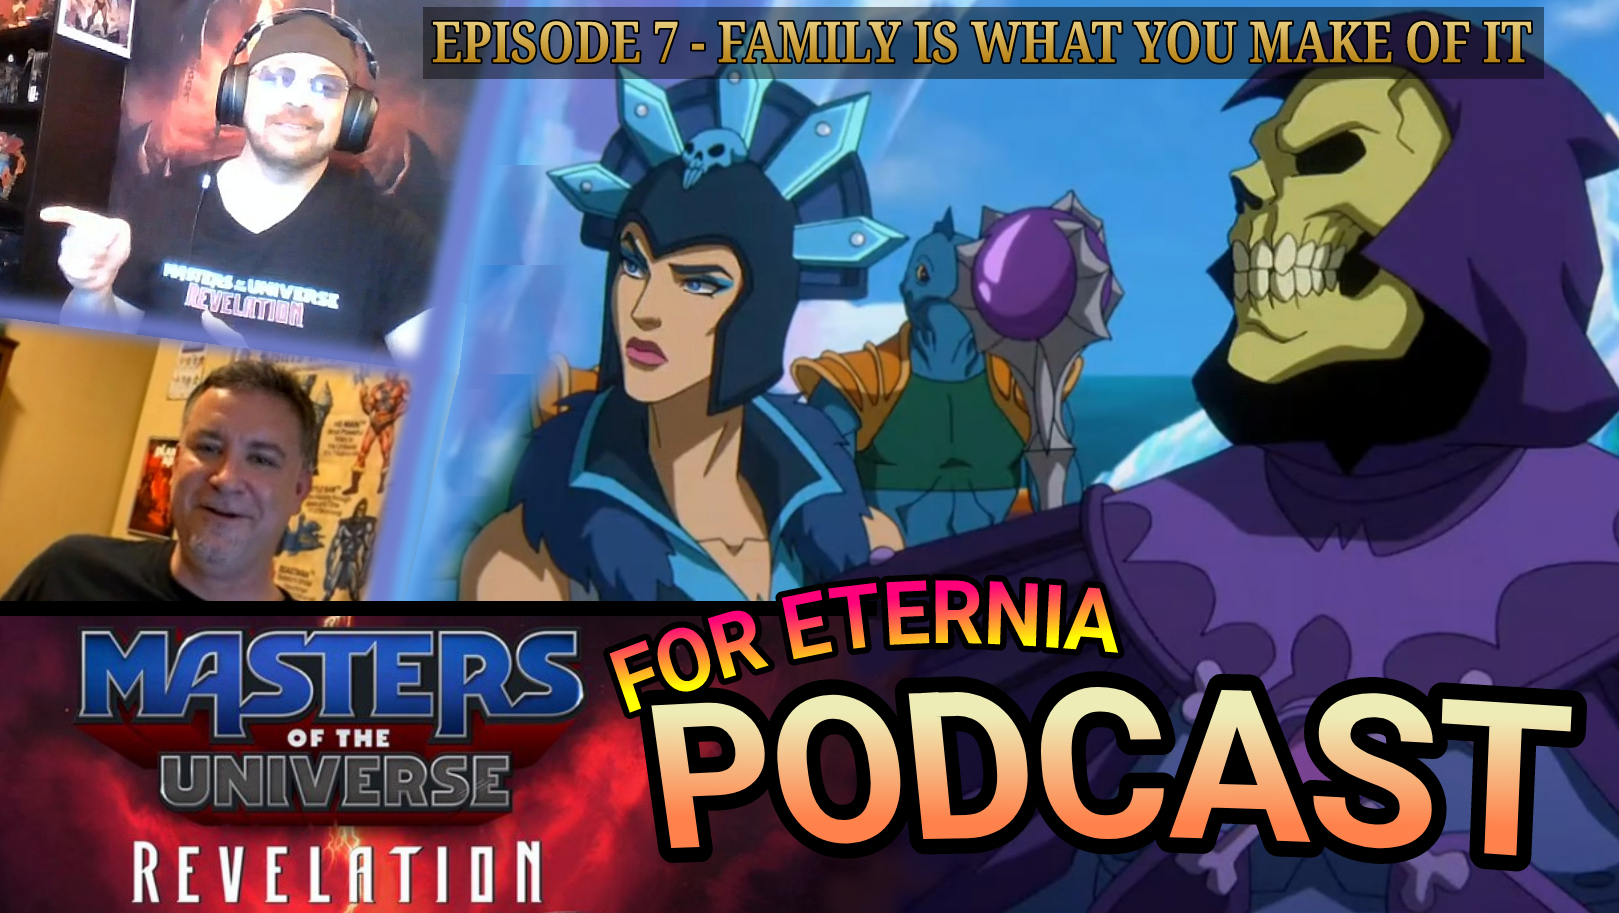 Talking ”Masters of the Universe: Revelation” Episode 3, Filmation, Kids Cereal & More! Listen to the FOR ETERNIA Official Podcast 007!